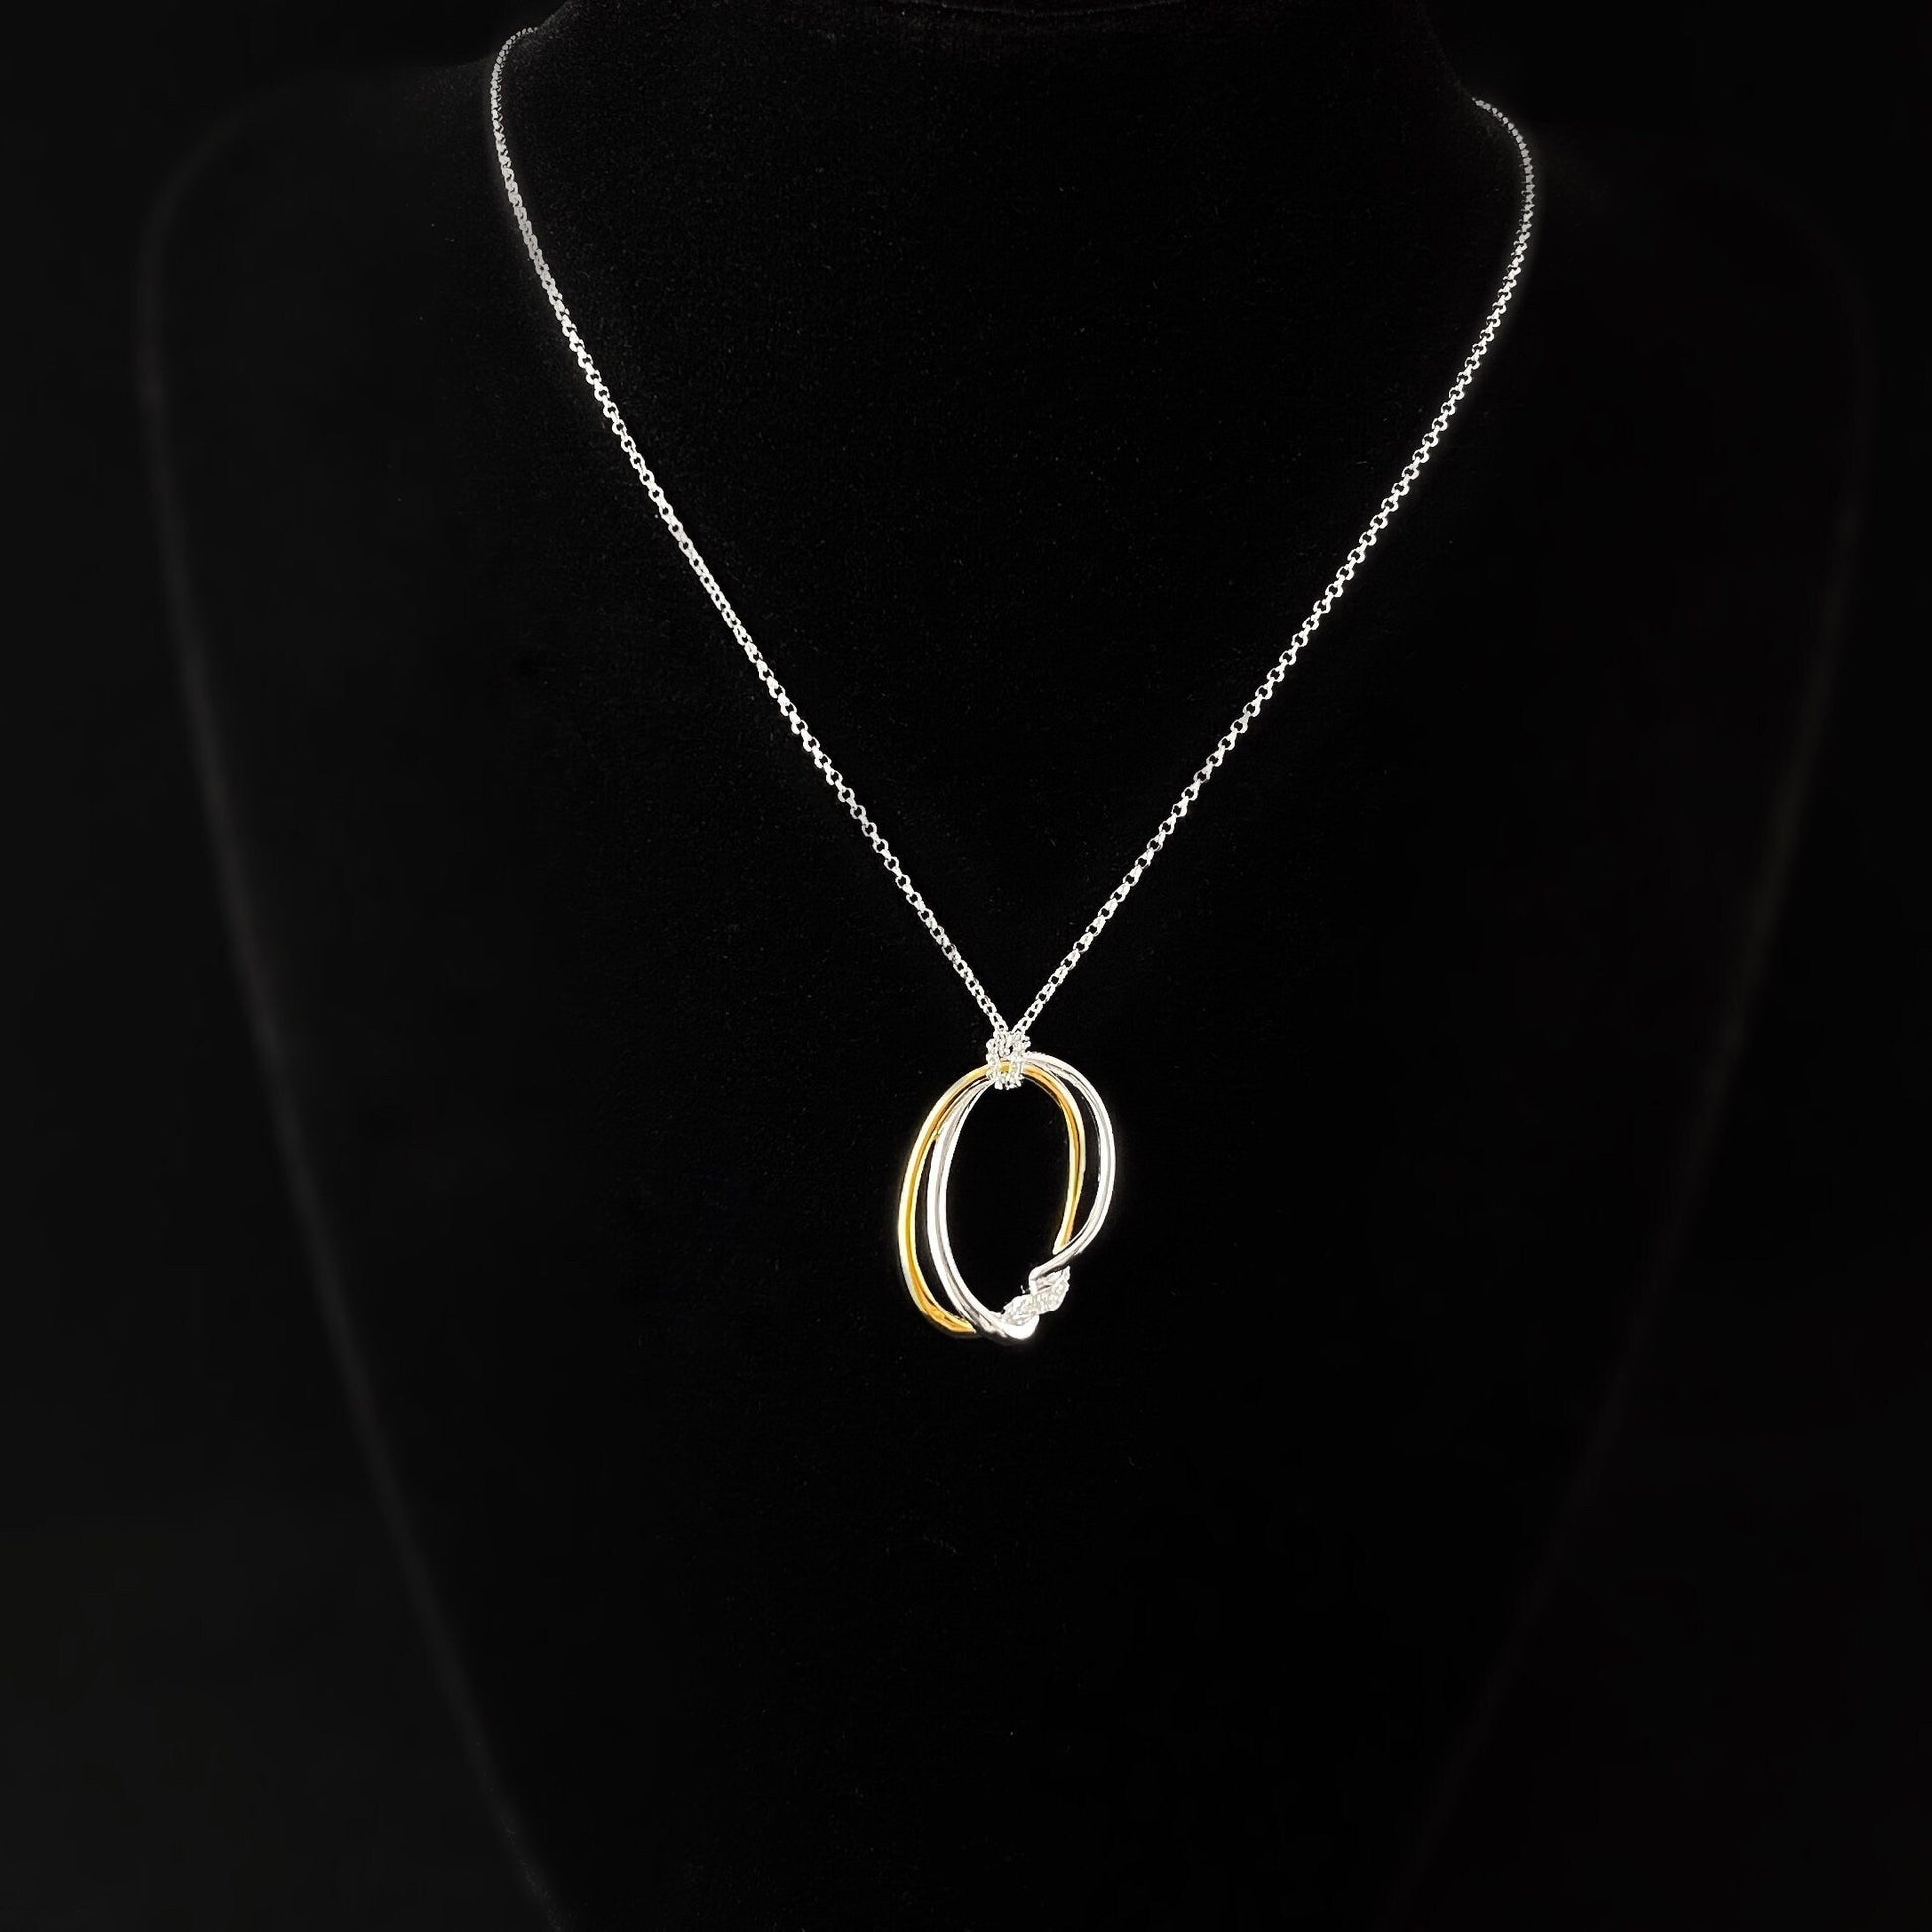 925 Sterling Silver and 18kt Yellow Gold Swirl Necklace - Elle Jewelry